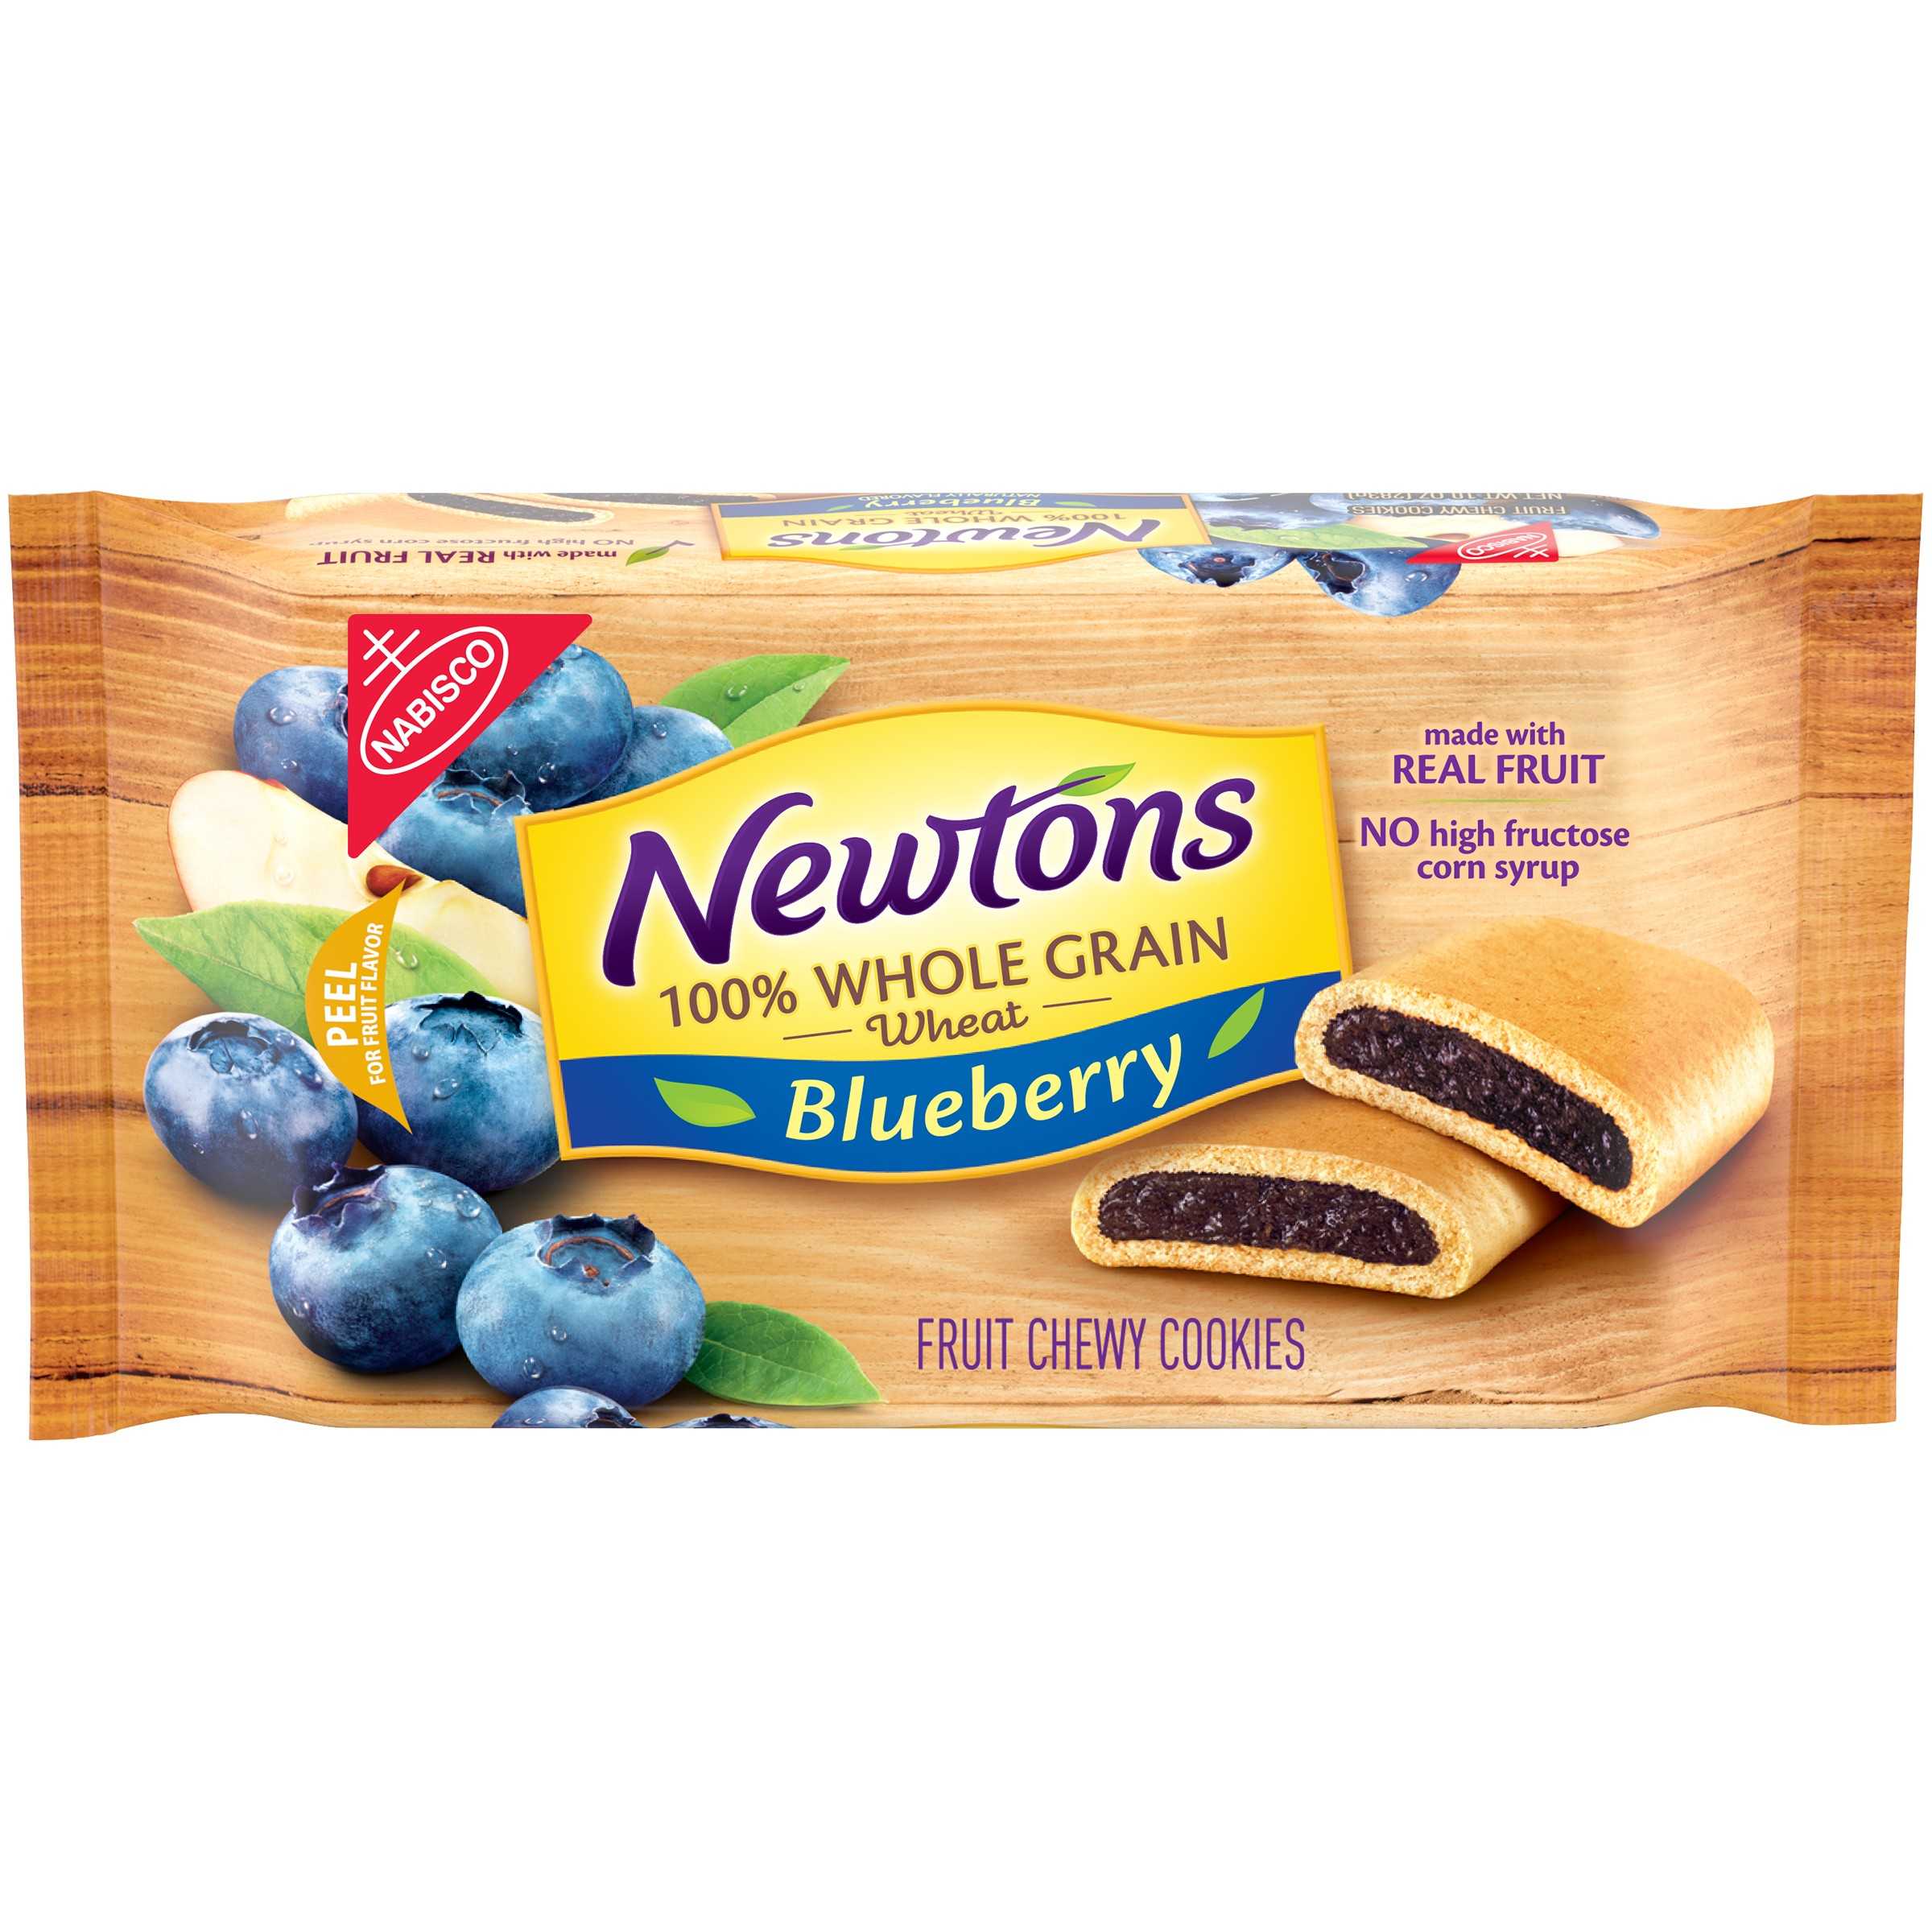 Newtons Blueberry 100% Whole Grain Fruit Chewy Cookies, 10z package